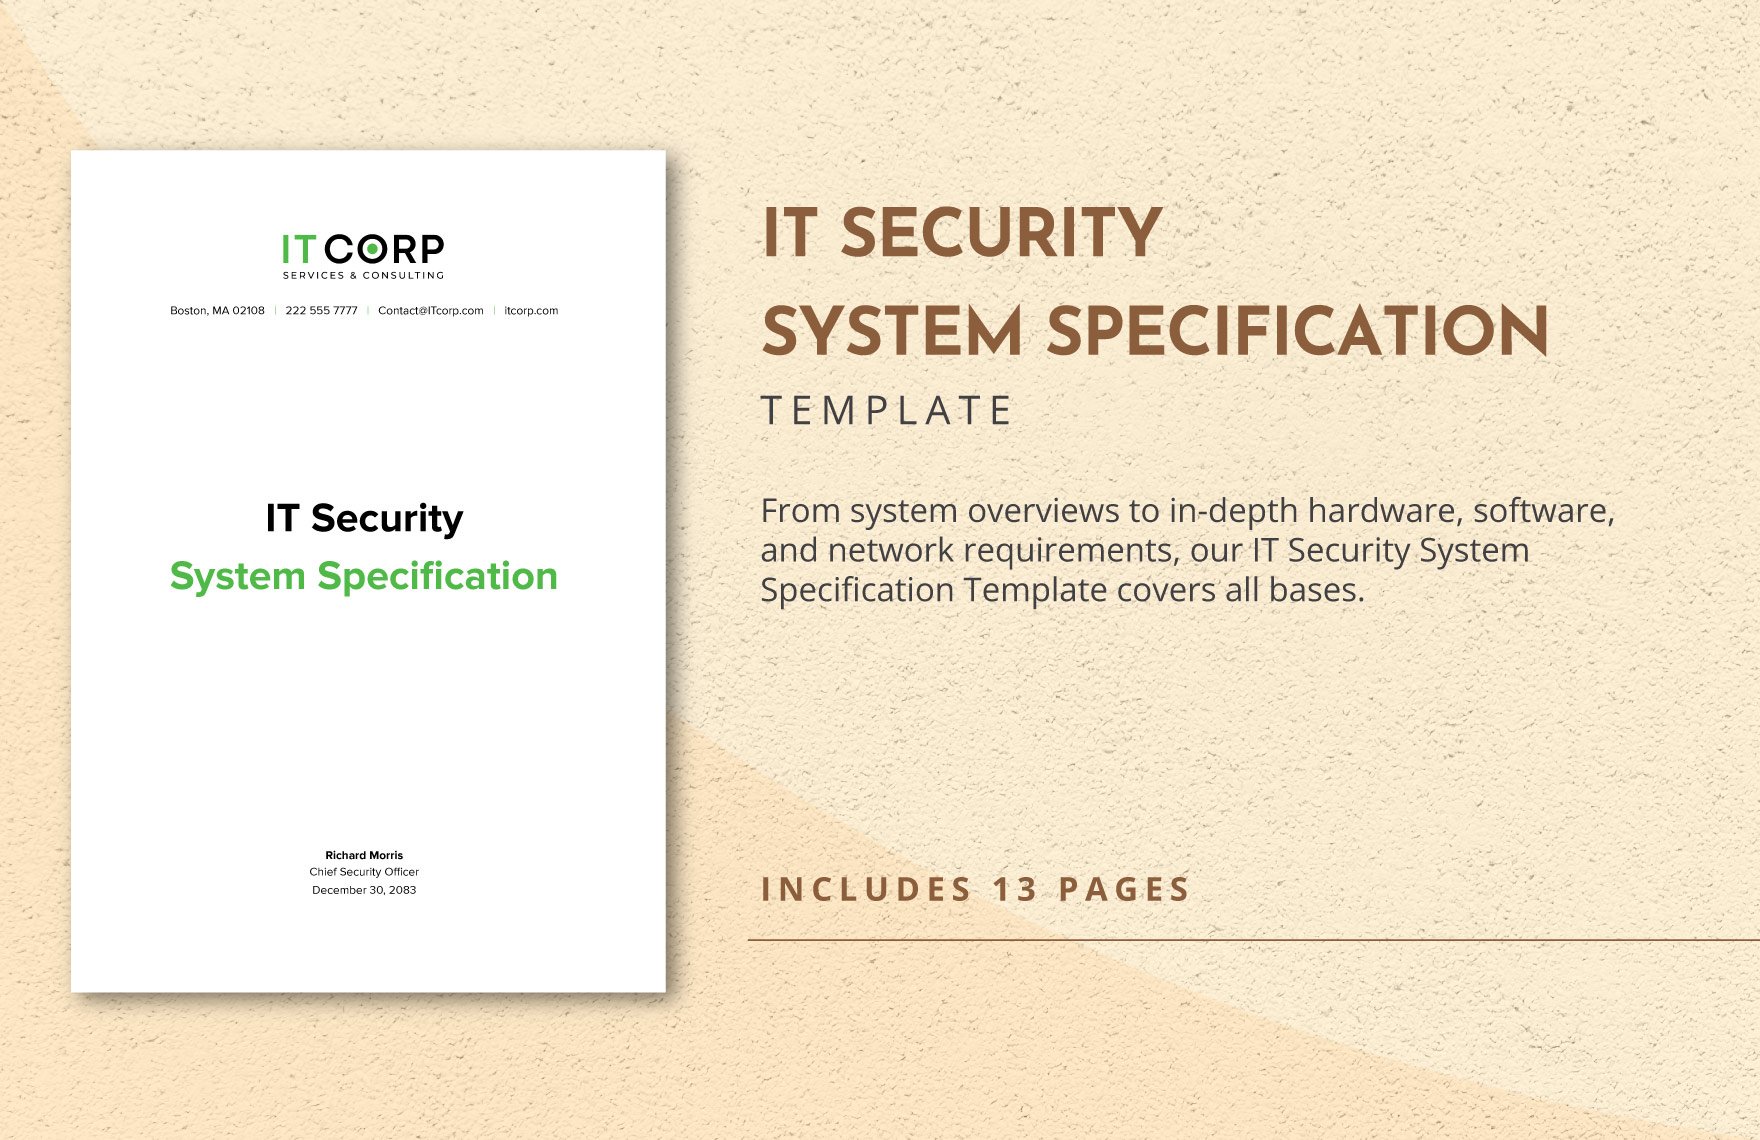 IT Security System Specification Template